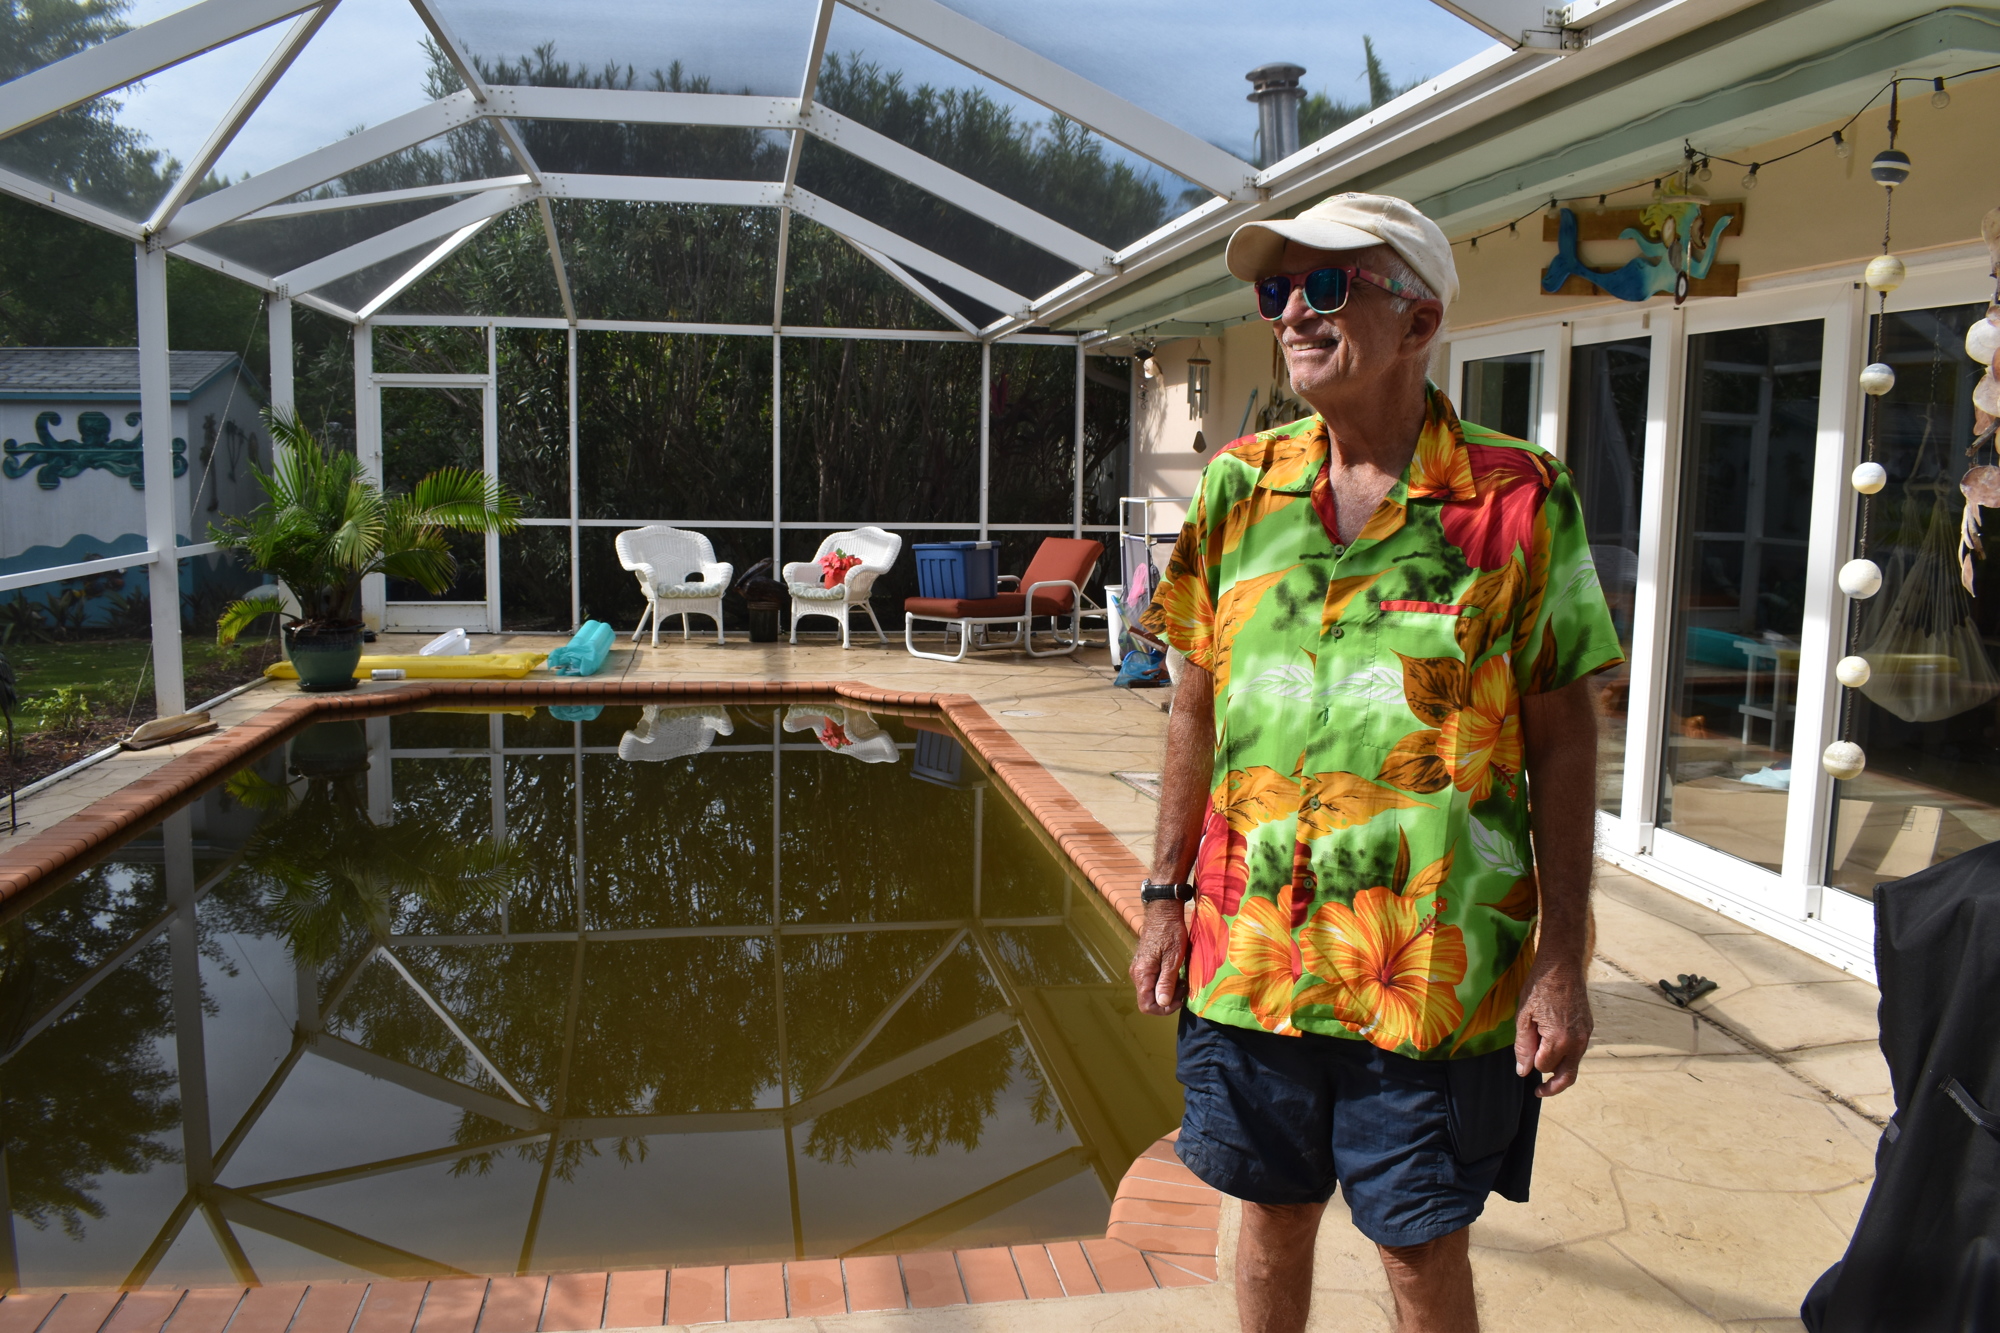 Nov. 19: In some cases, as in Fred Kagi's home, seawater or water from rising Sarasota Bay, overtook swimming pools.